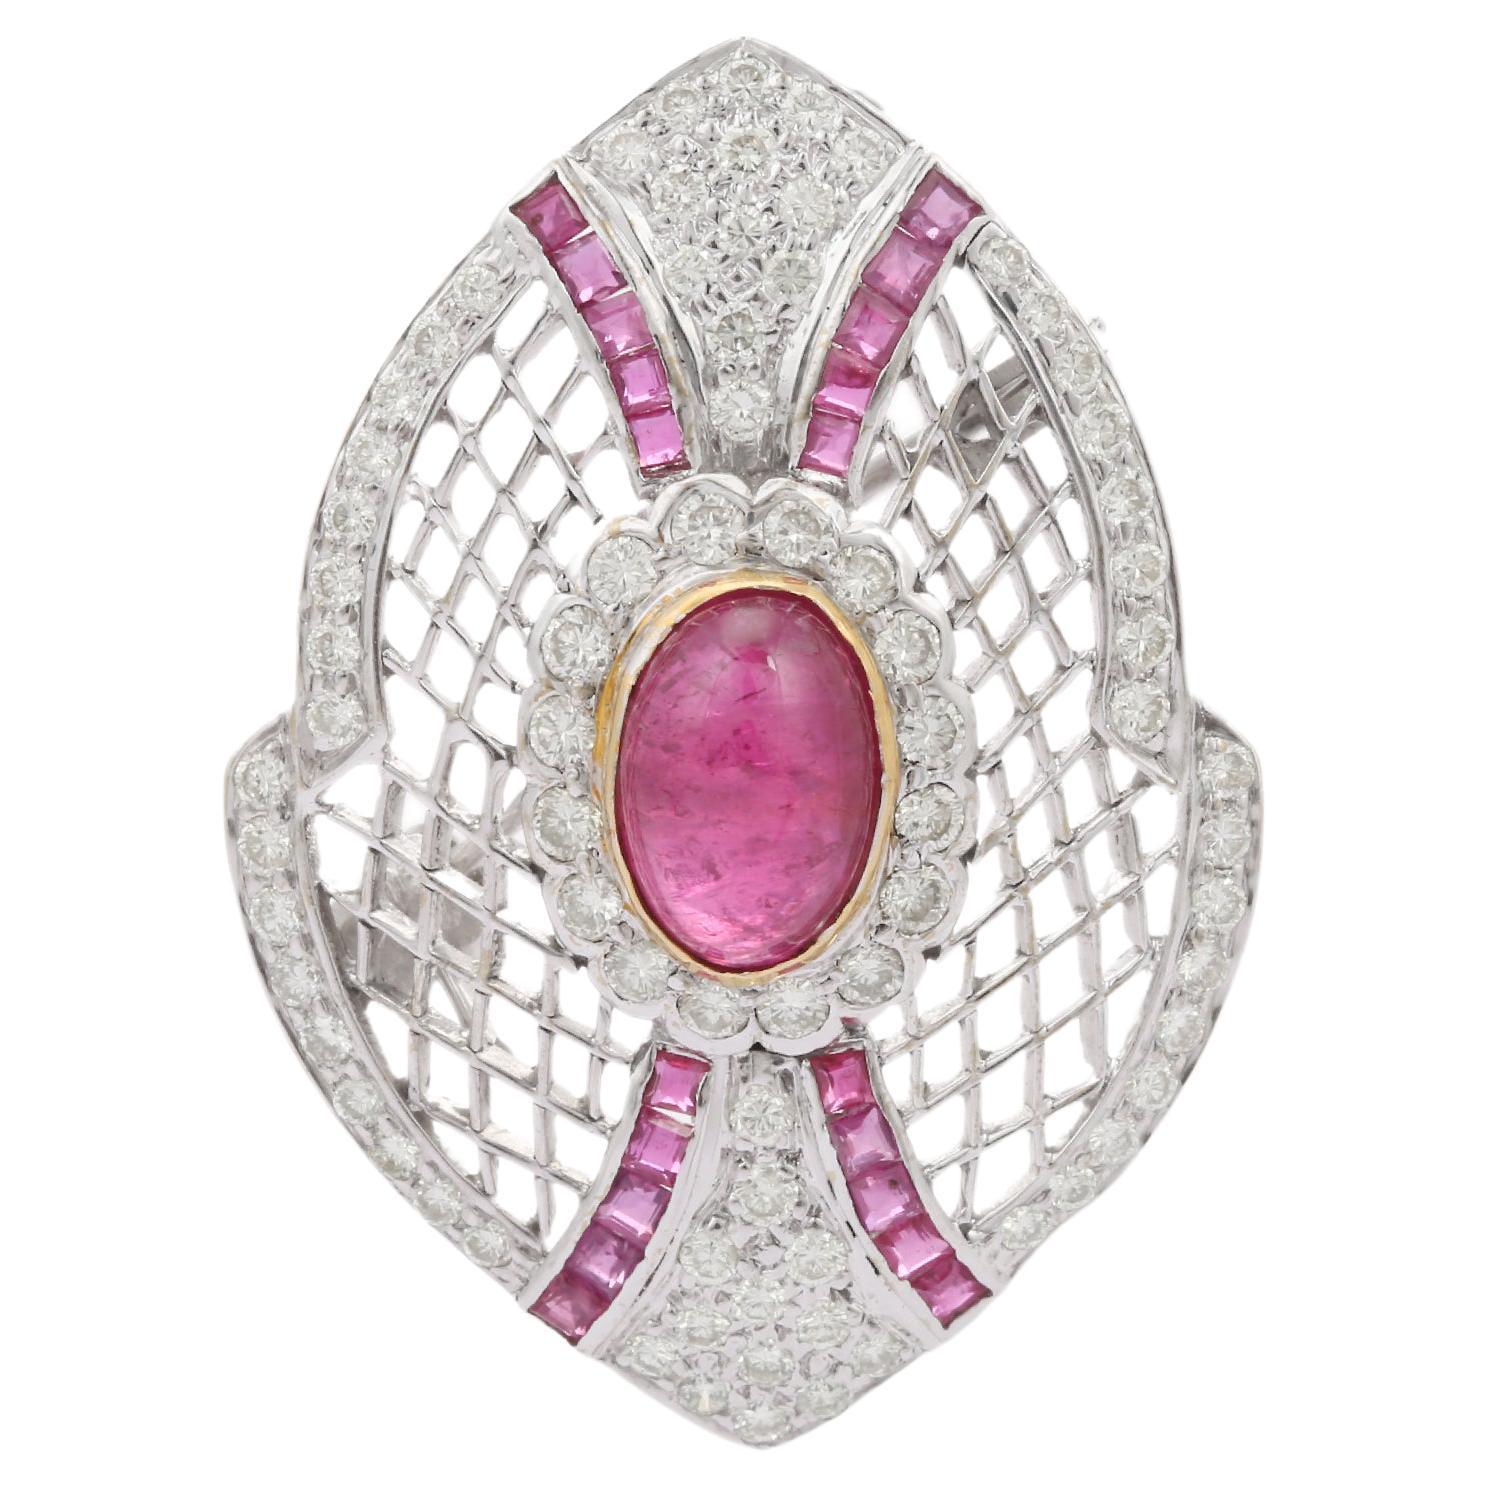 18K White Gold Ruby Brooch with Diamonds